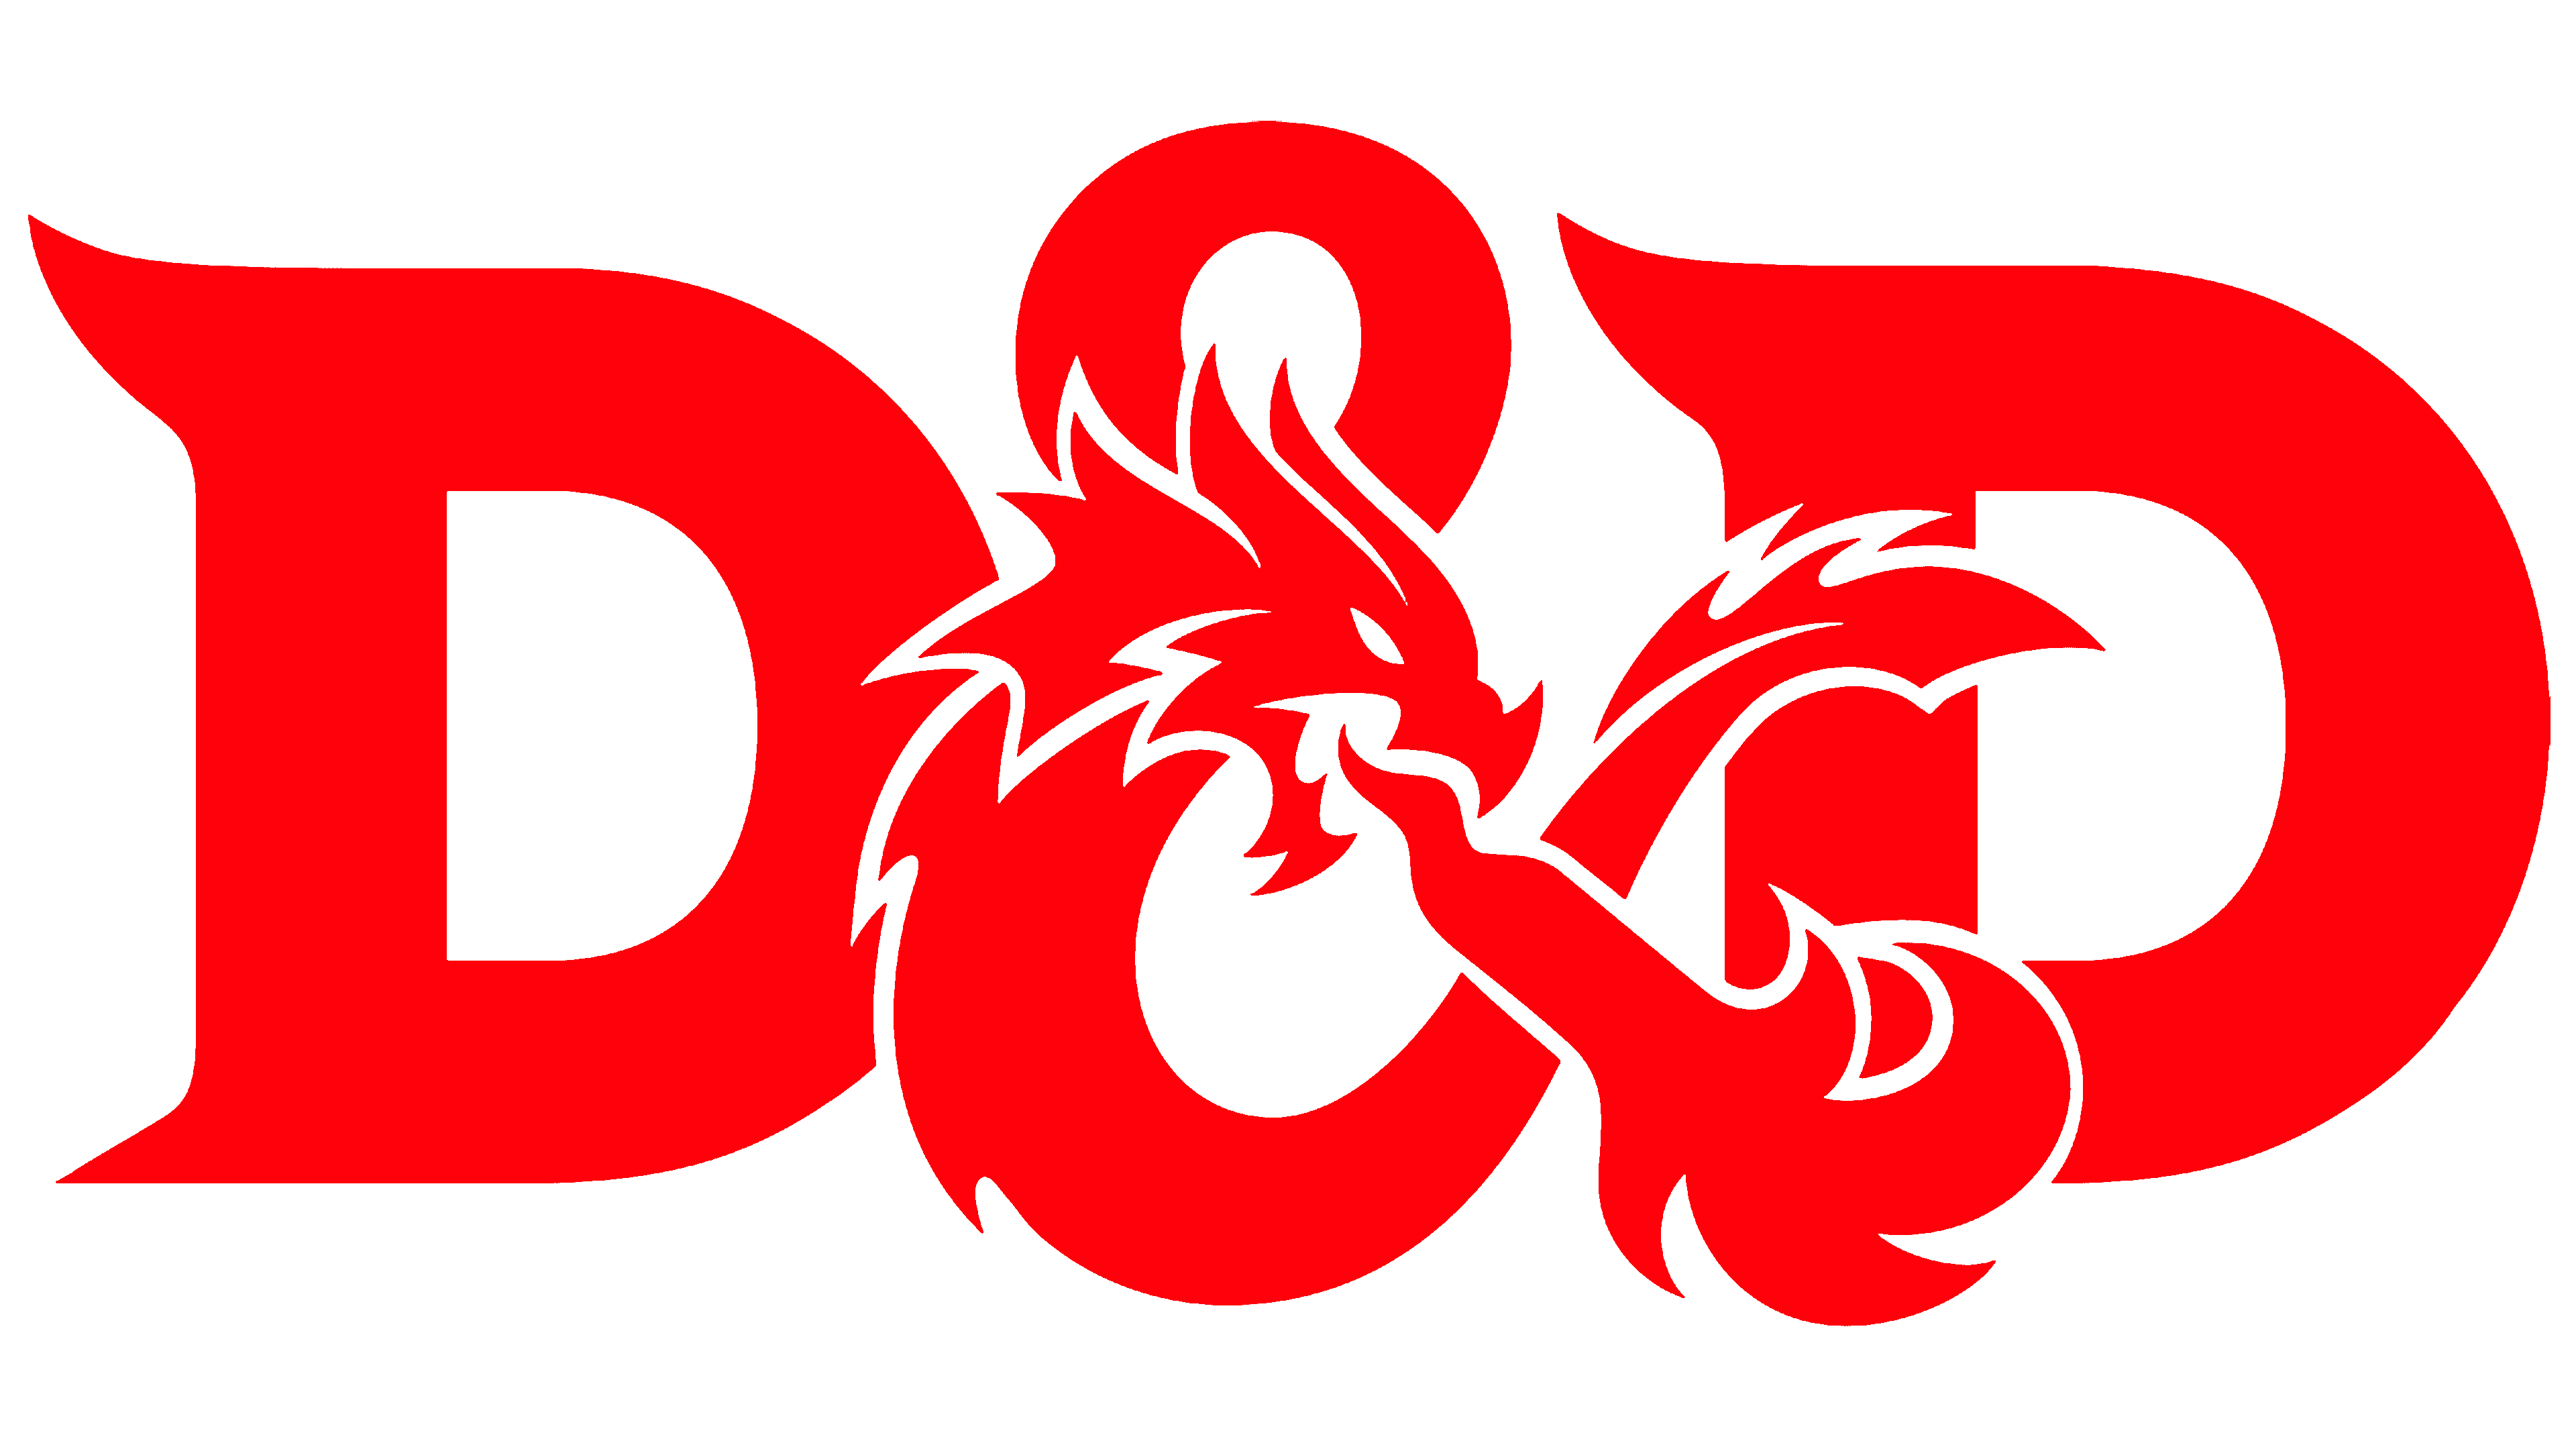 DnD (Dungeons & Dragons) Logo, symbol, meaning, history, PNG, brand